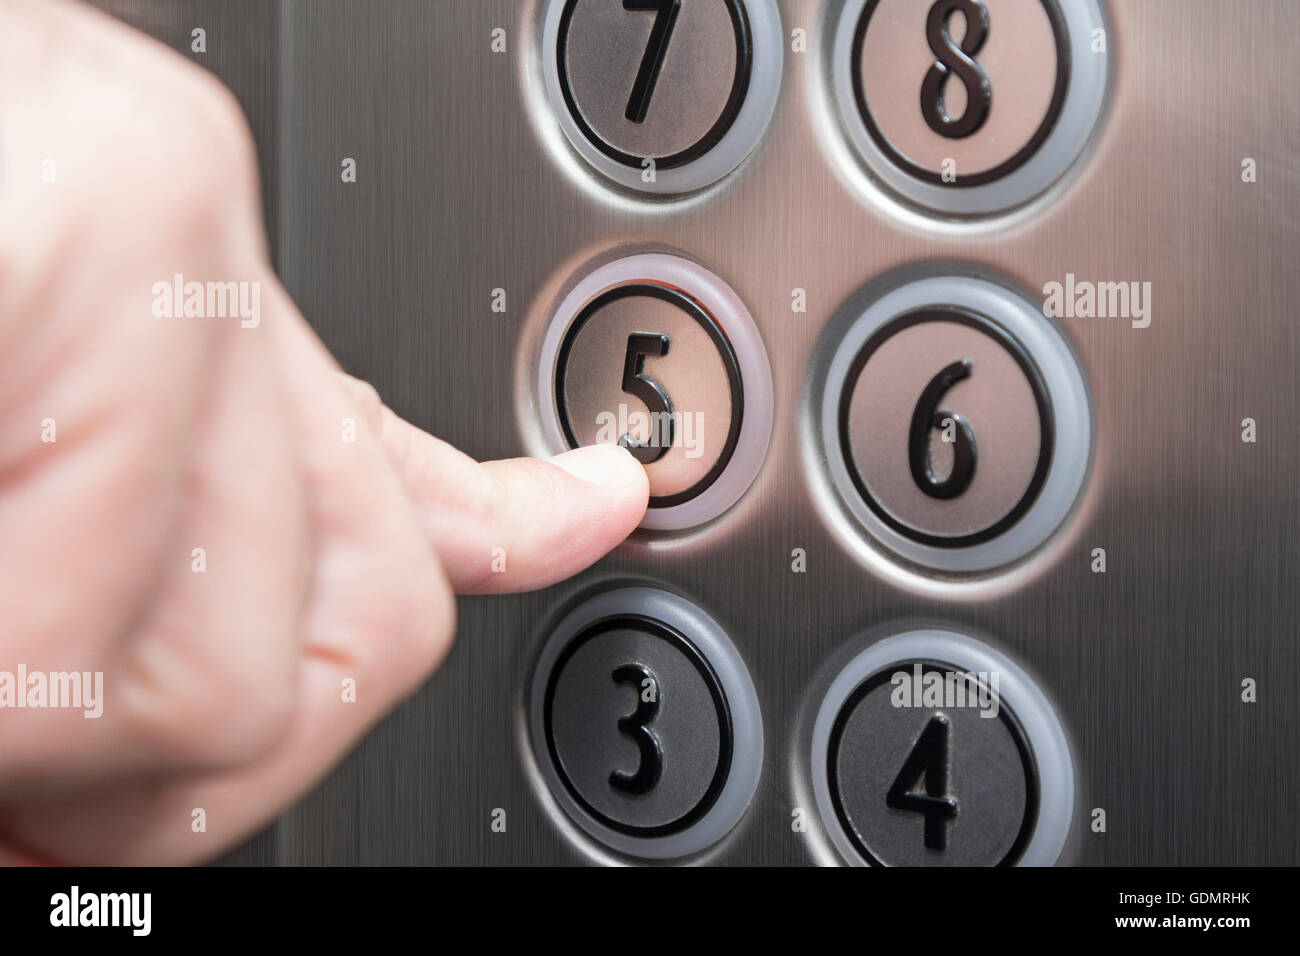 Forefinger pressing the fifth floor button in the elevator Stock Photo